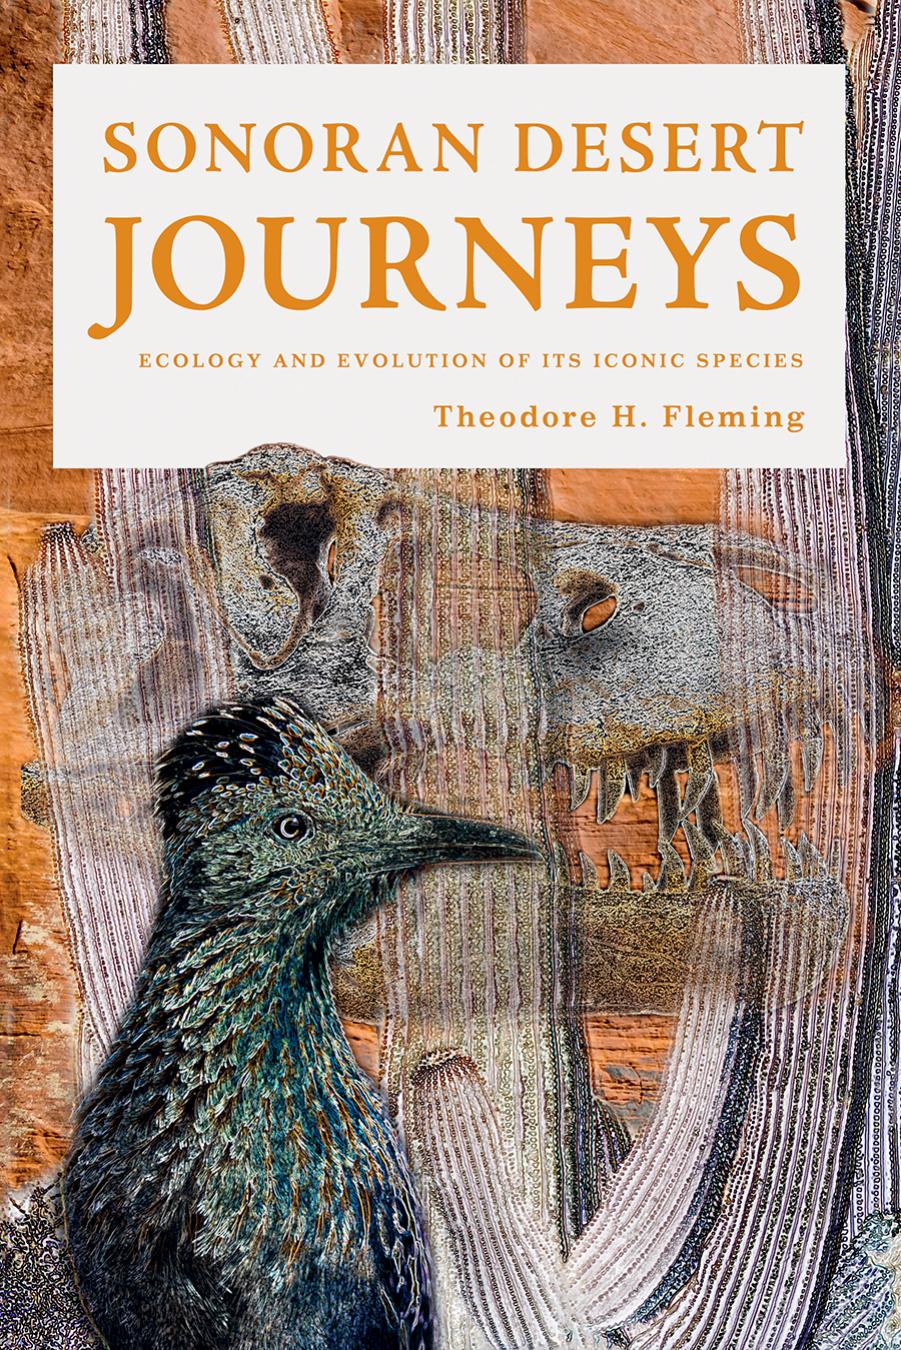 Sonoran Desert Journeys: Ecology and Evolution of Its Iconic Species by Theodore H. Fleming